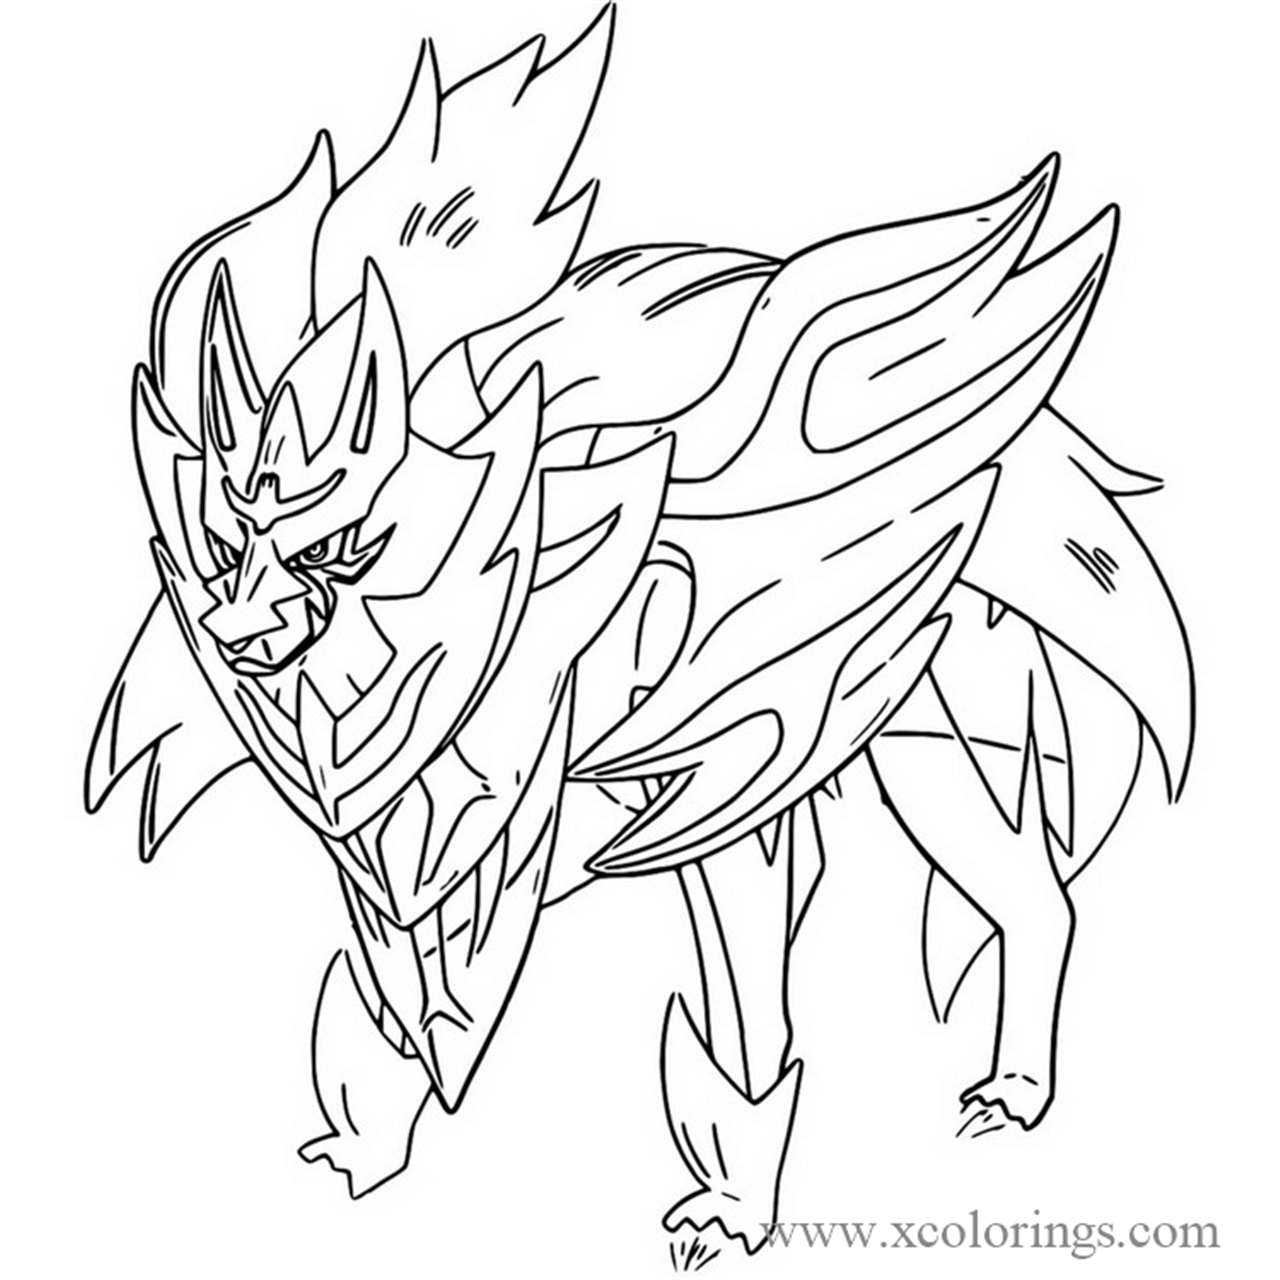 Zamazenta from Pokemon Sword and Shield Coloring Pages - XColorings.com